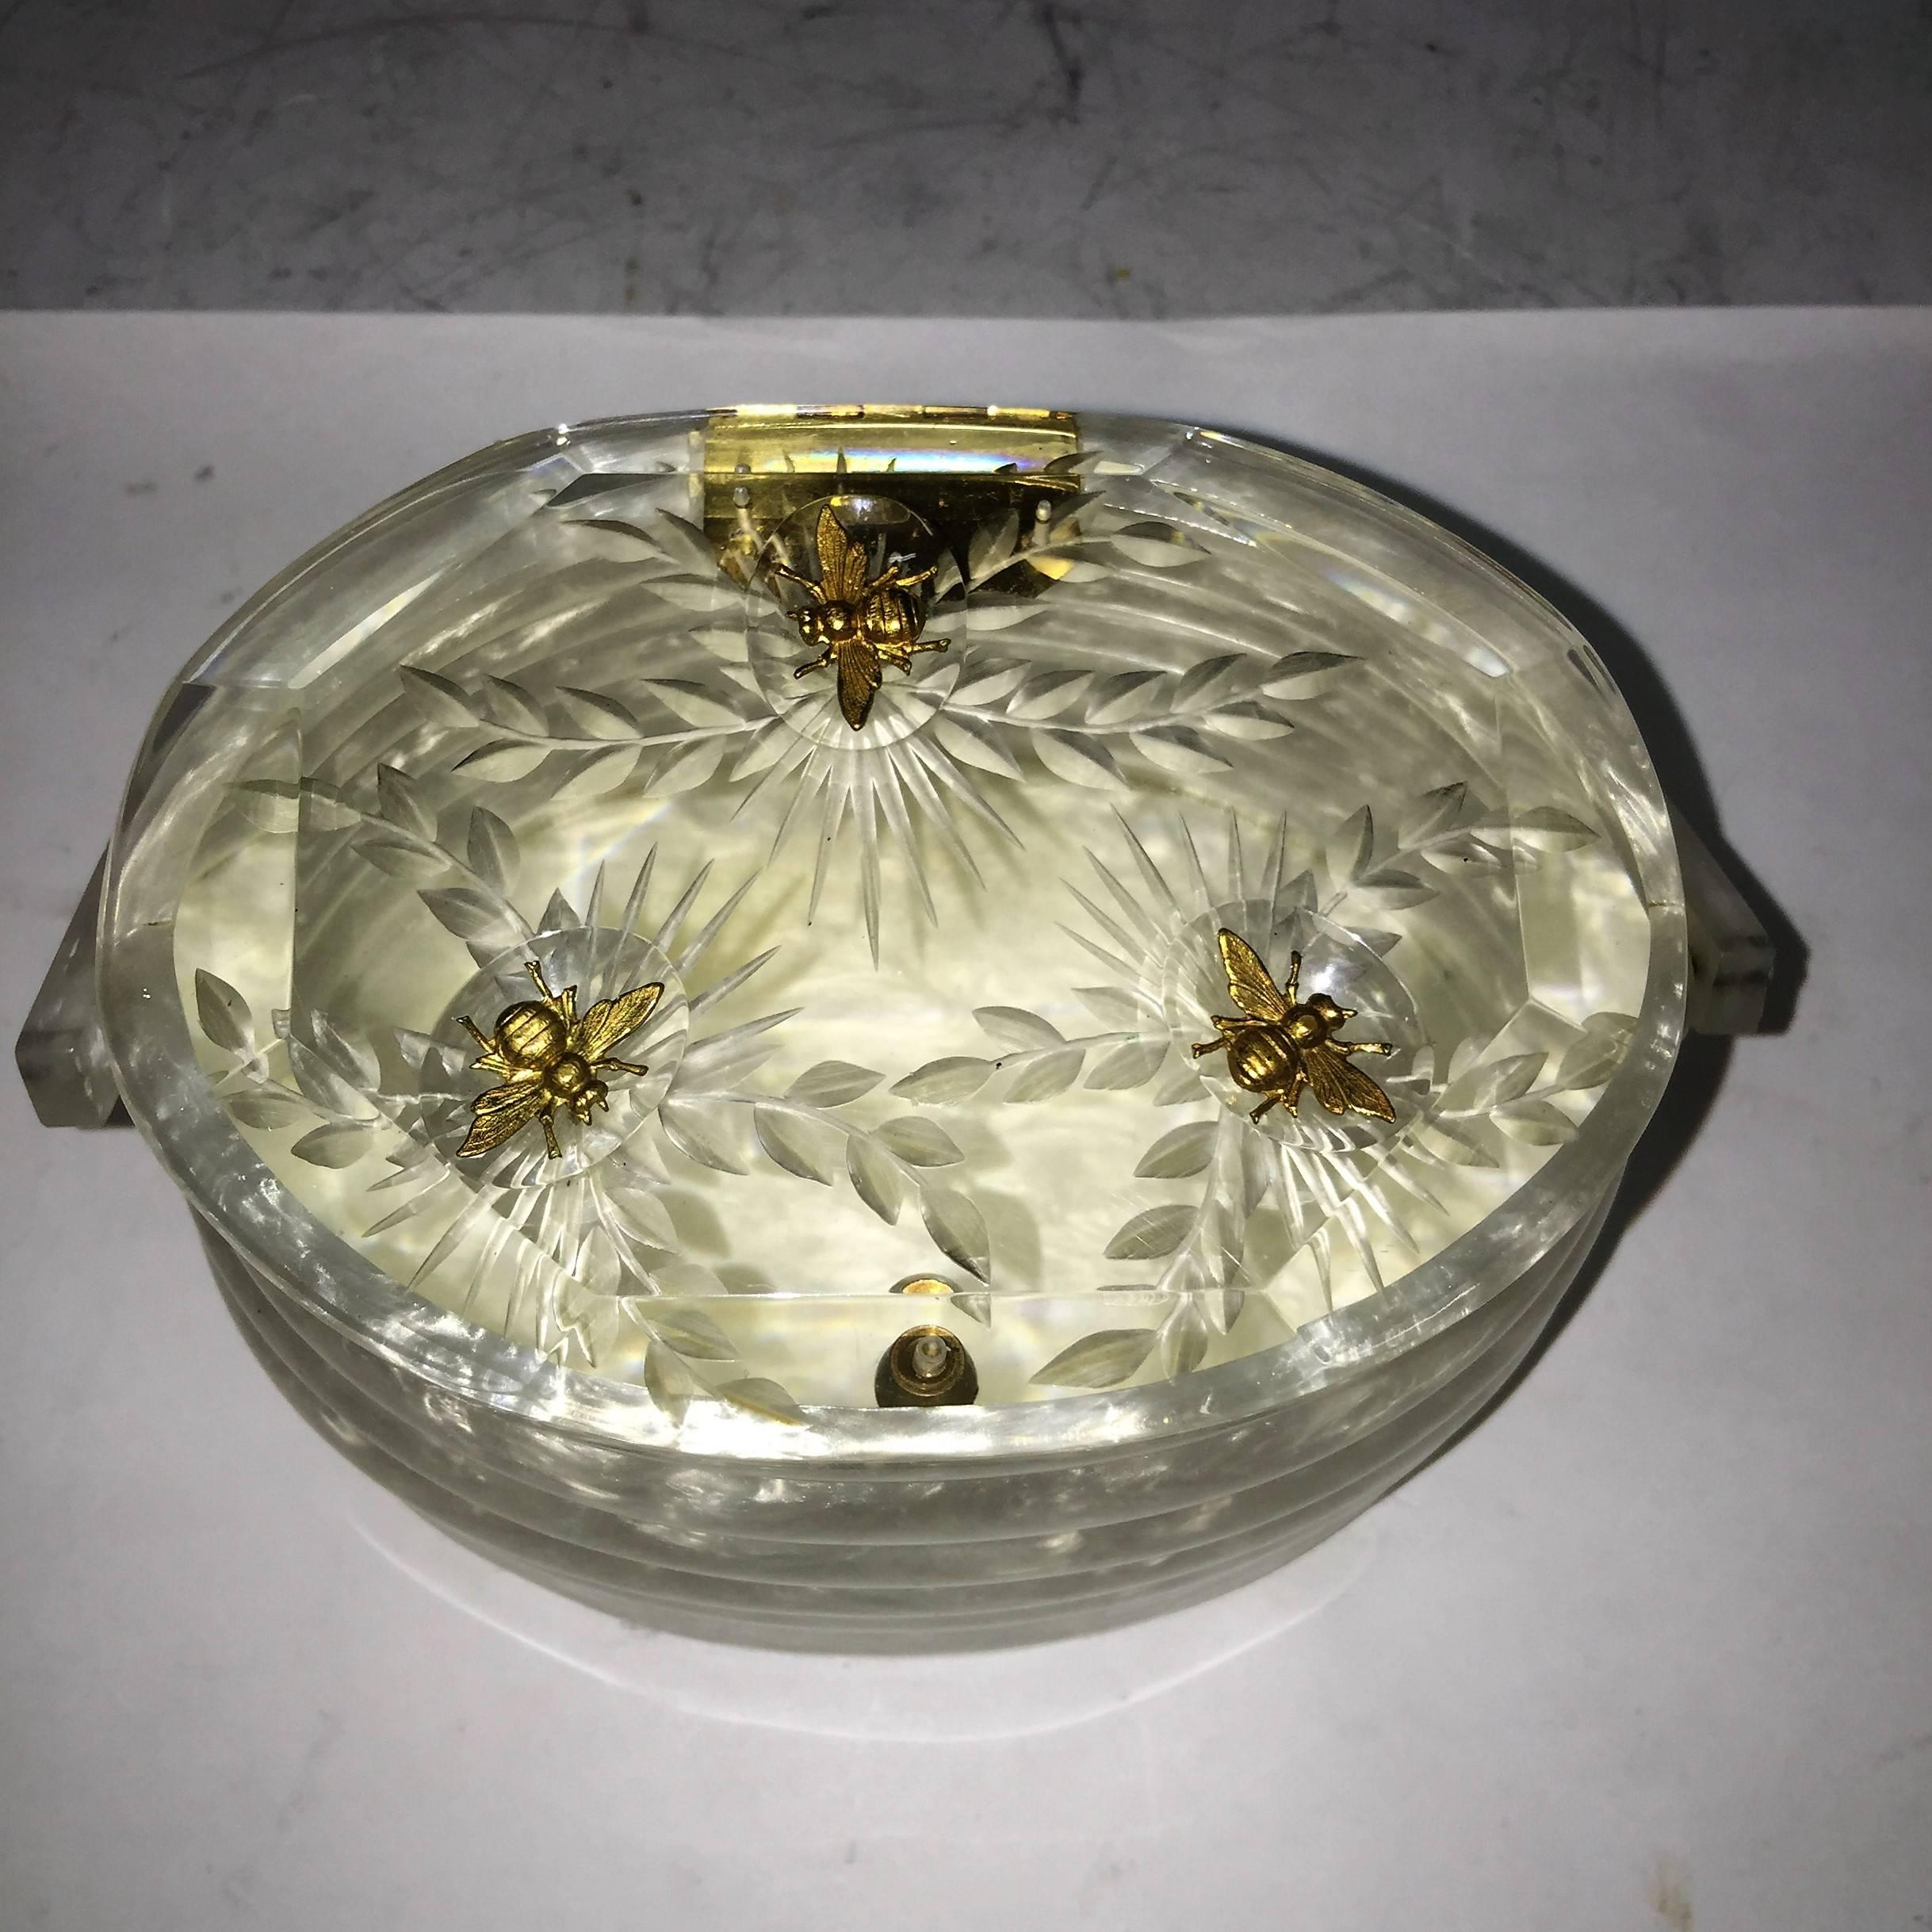 Exceptional Pearlized White Beehive Lucite Handbag Made in the 1950's in the United States.Wonderful Design of a Beehive with Clear Carved Lucite Top with  Beveled Sides and Carved Flower Designs accented by Goldtone Flying Metal Bees.In Perfect